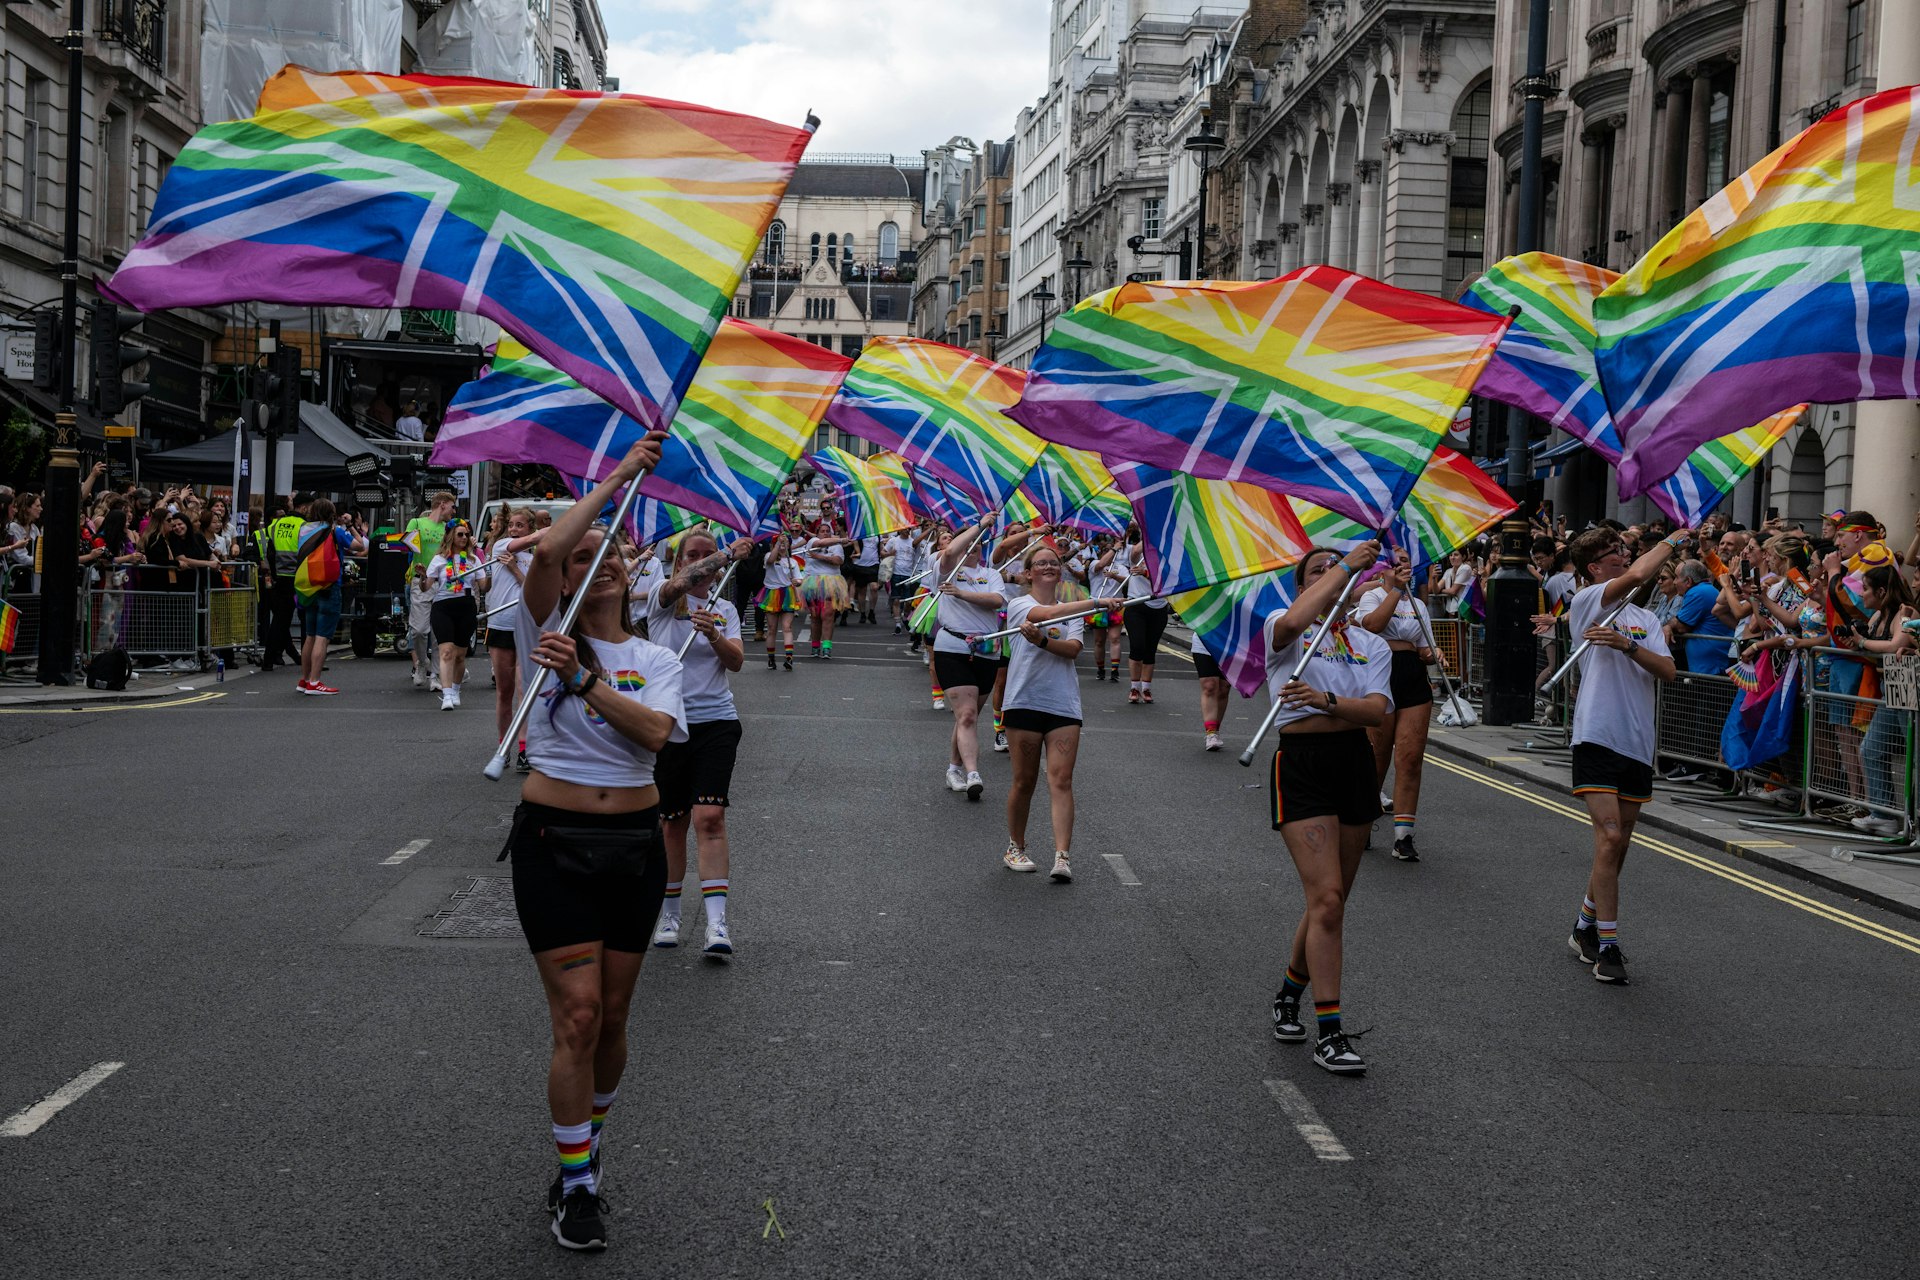 Participants carry rainbow flags with the Union Jack superimposed at the Pride march, London, England, United Kingdom